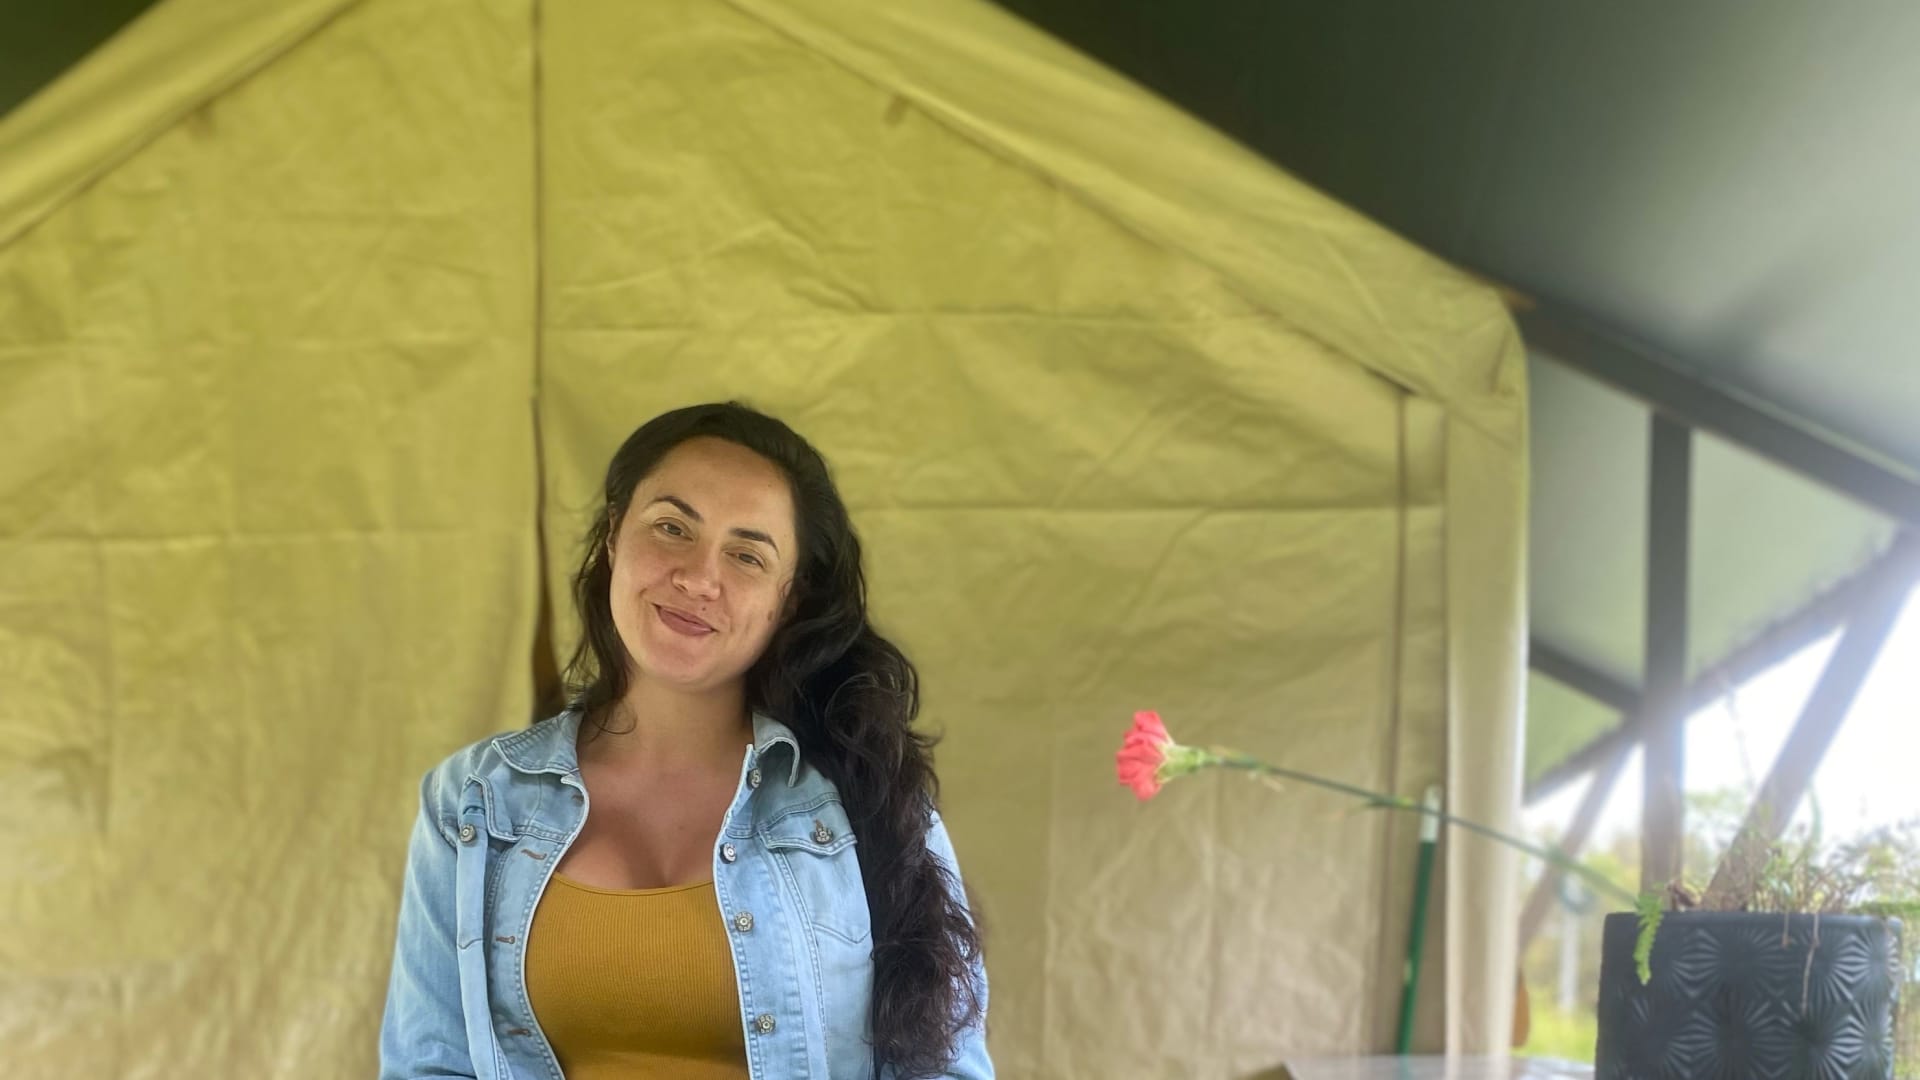 This 28-year-old spent $8,000 setting up an Airbnb tent near a Hawaiian volcano–now it earns her $28,000 per year